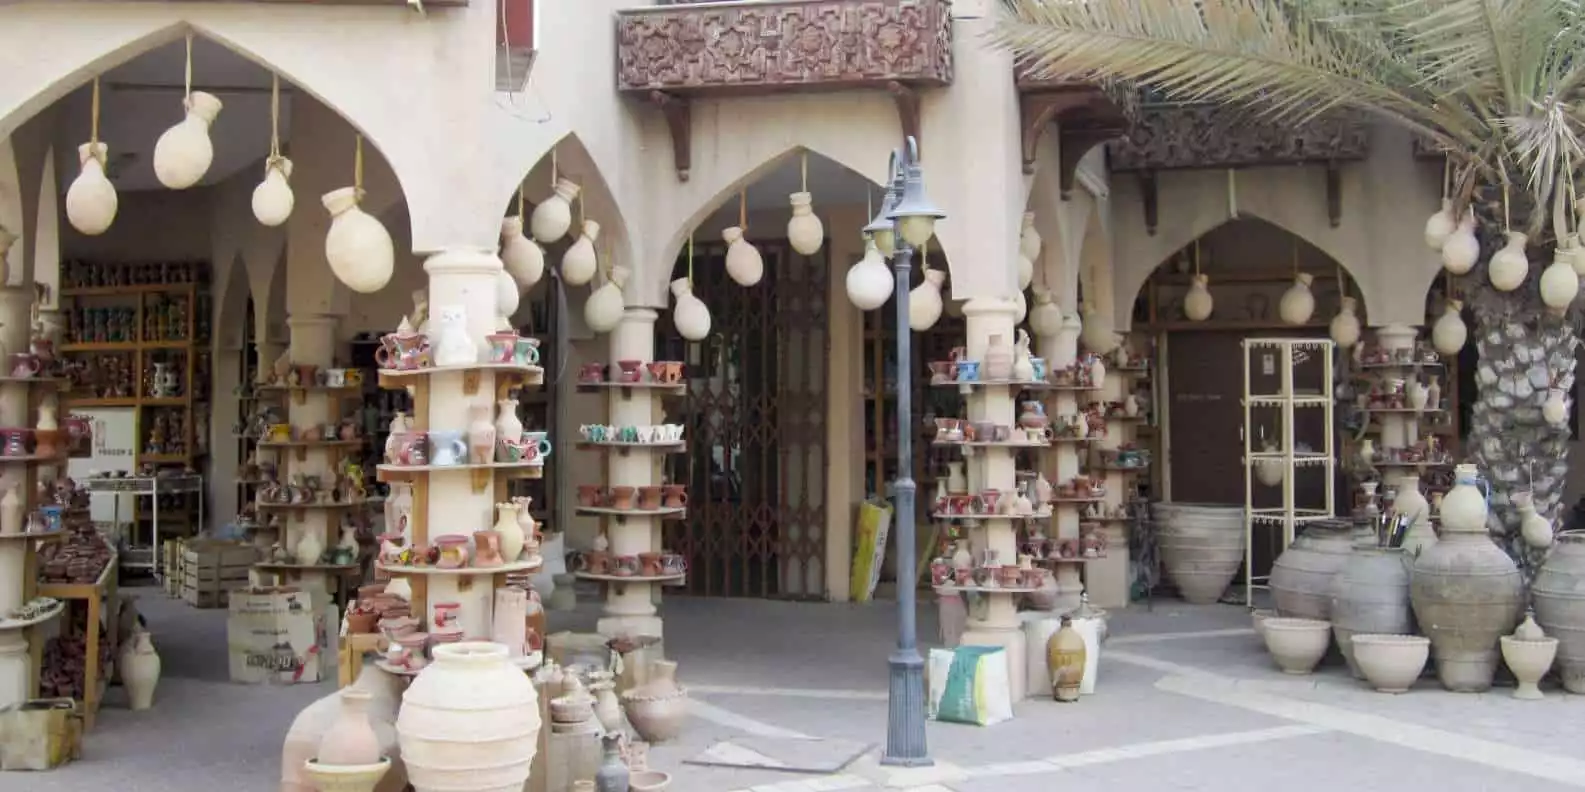 Jebel Shams and Treasures of the Interior Tour from Muscat | GetYourGuide